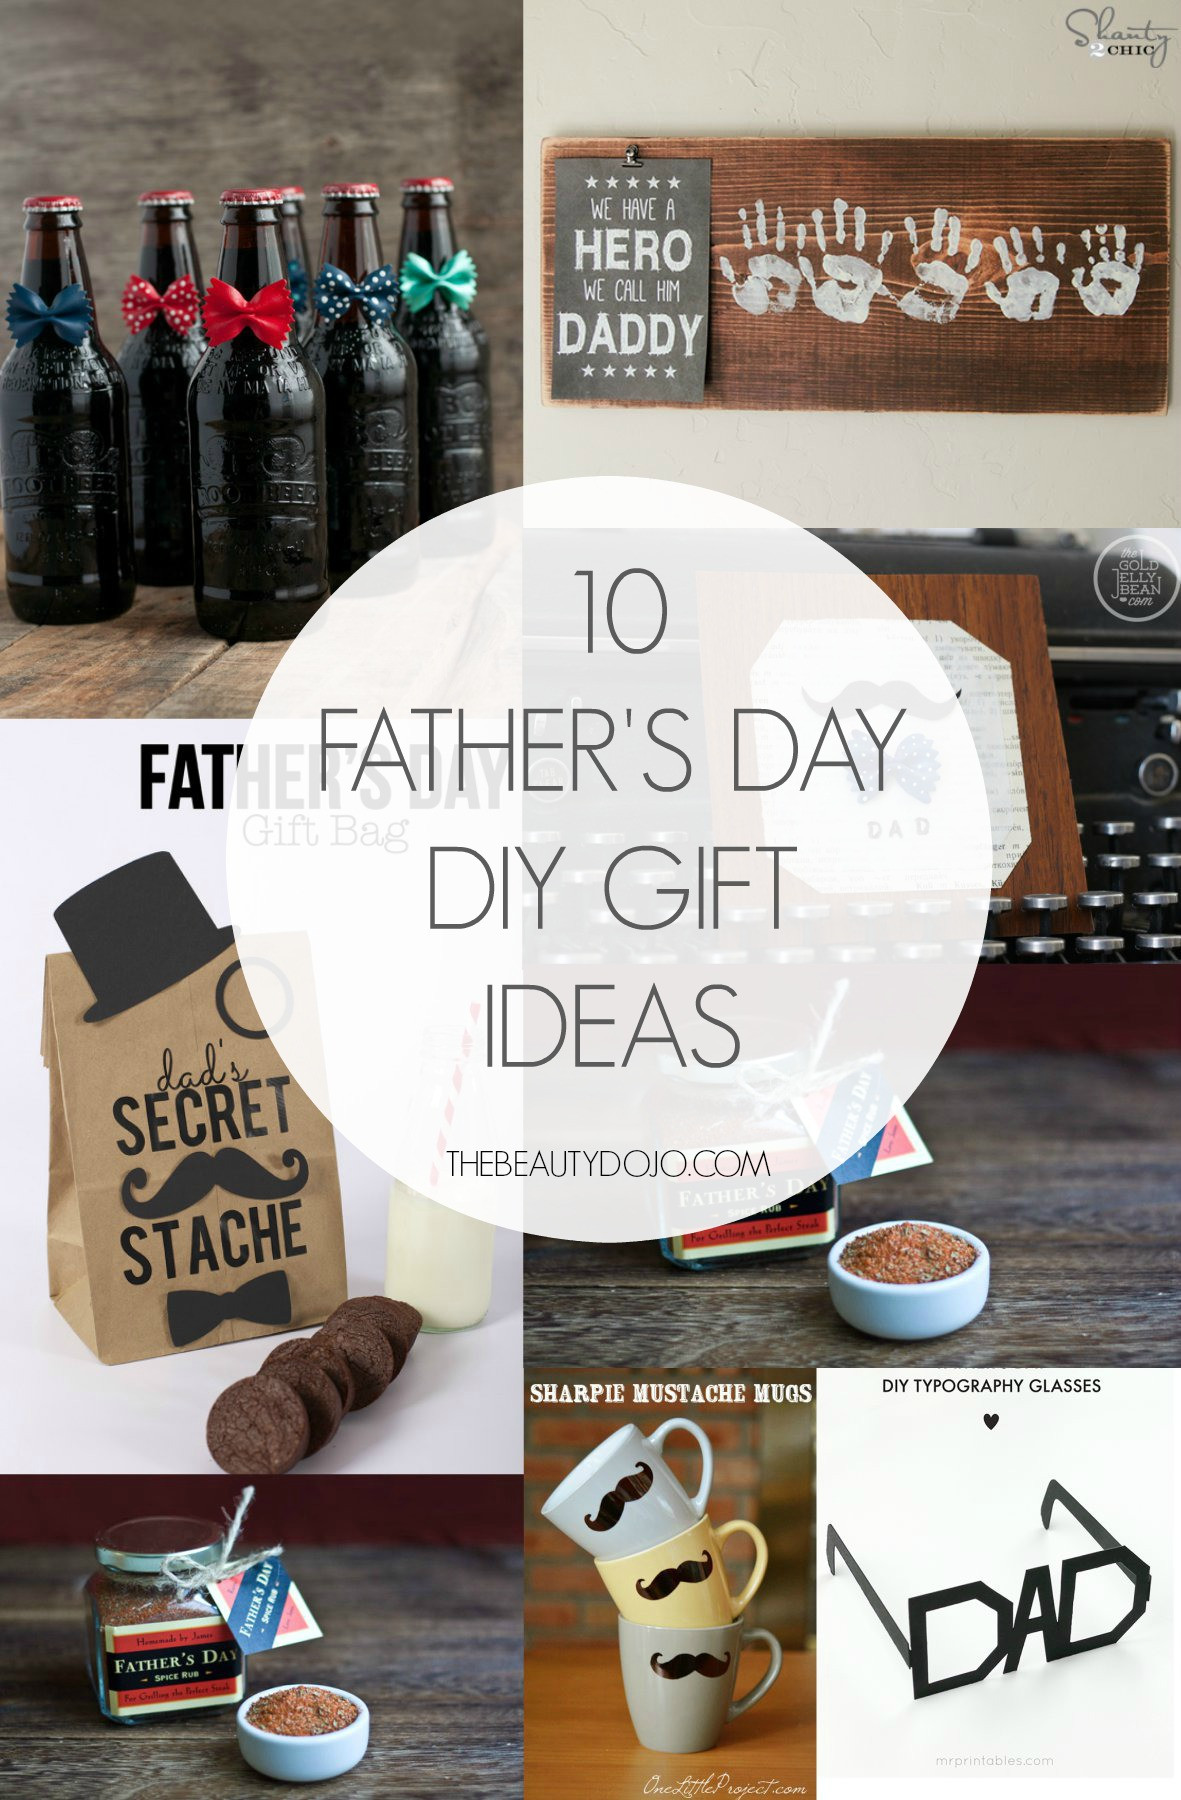 Good Mother's Day Gifts
 10 Father s Day DIY Gift Ideas The Beautydojo